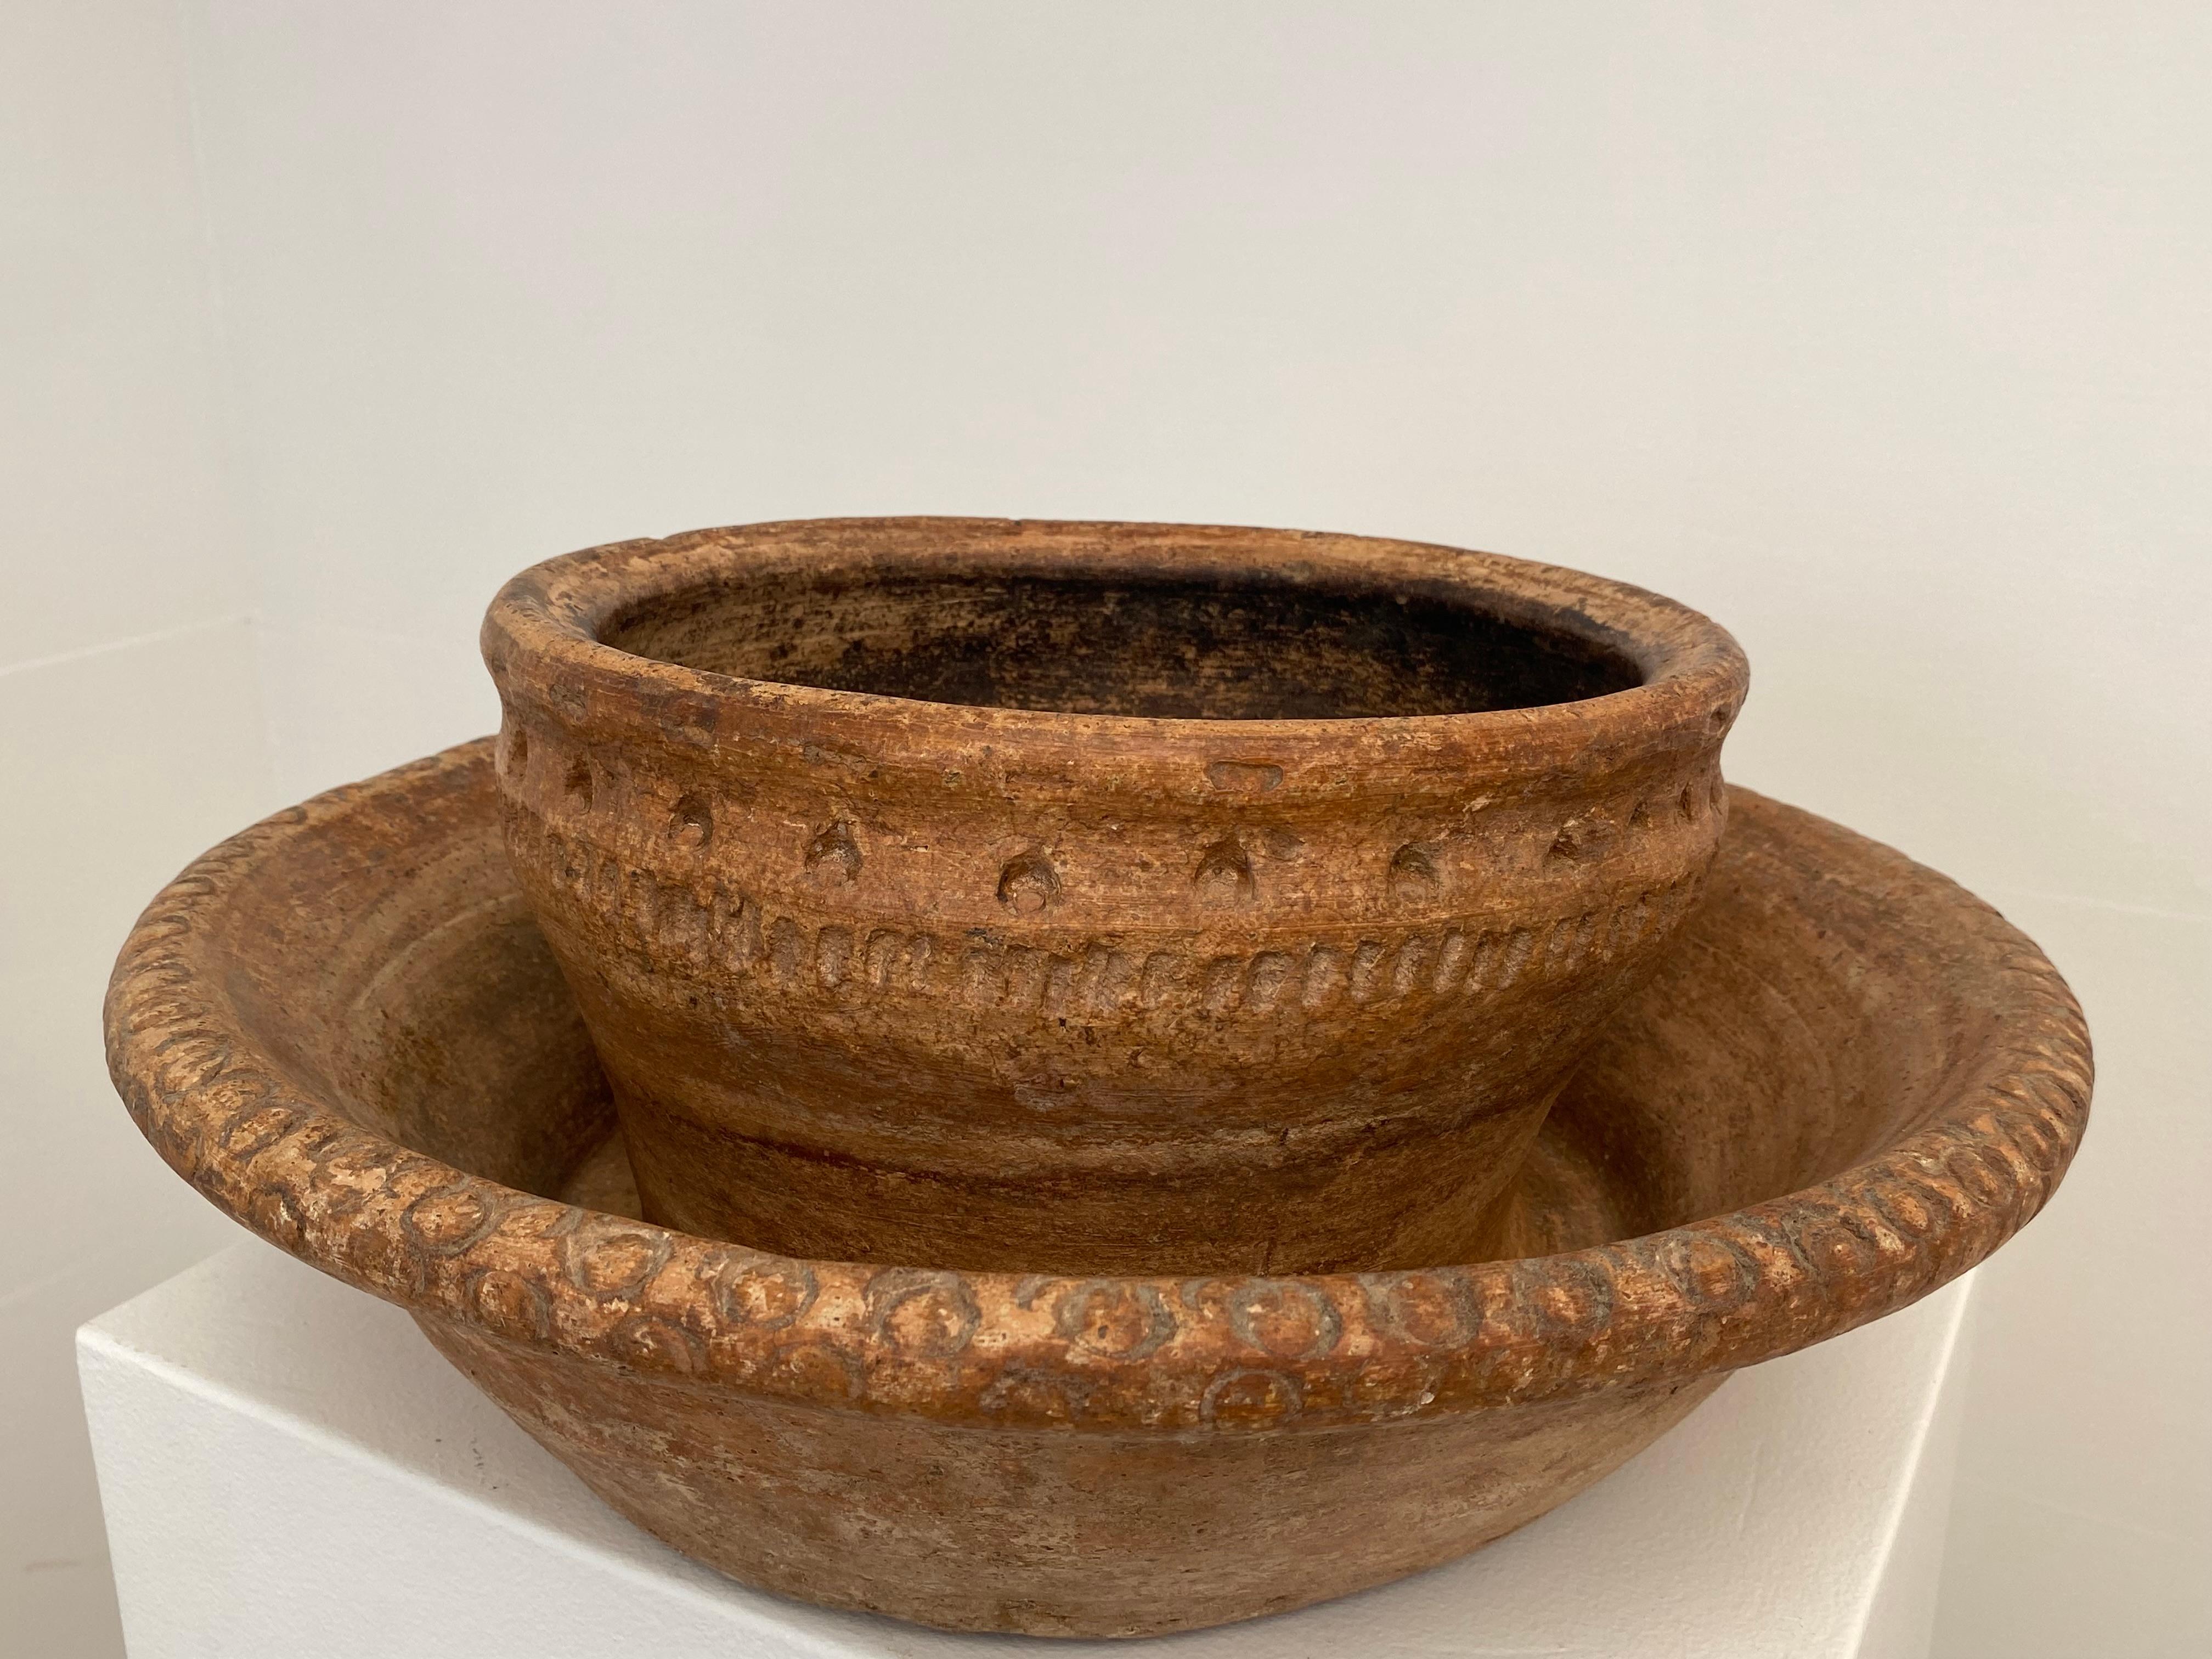 Exceptional Moroccan Terracotta' Bowl in Bowl ' ,   
used for washing hands, from the RIF mountains in the Northern part of Morocco,
good,old great Patina and Shine of the terracotta,
very decorative object